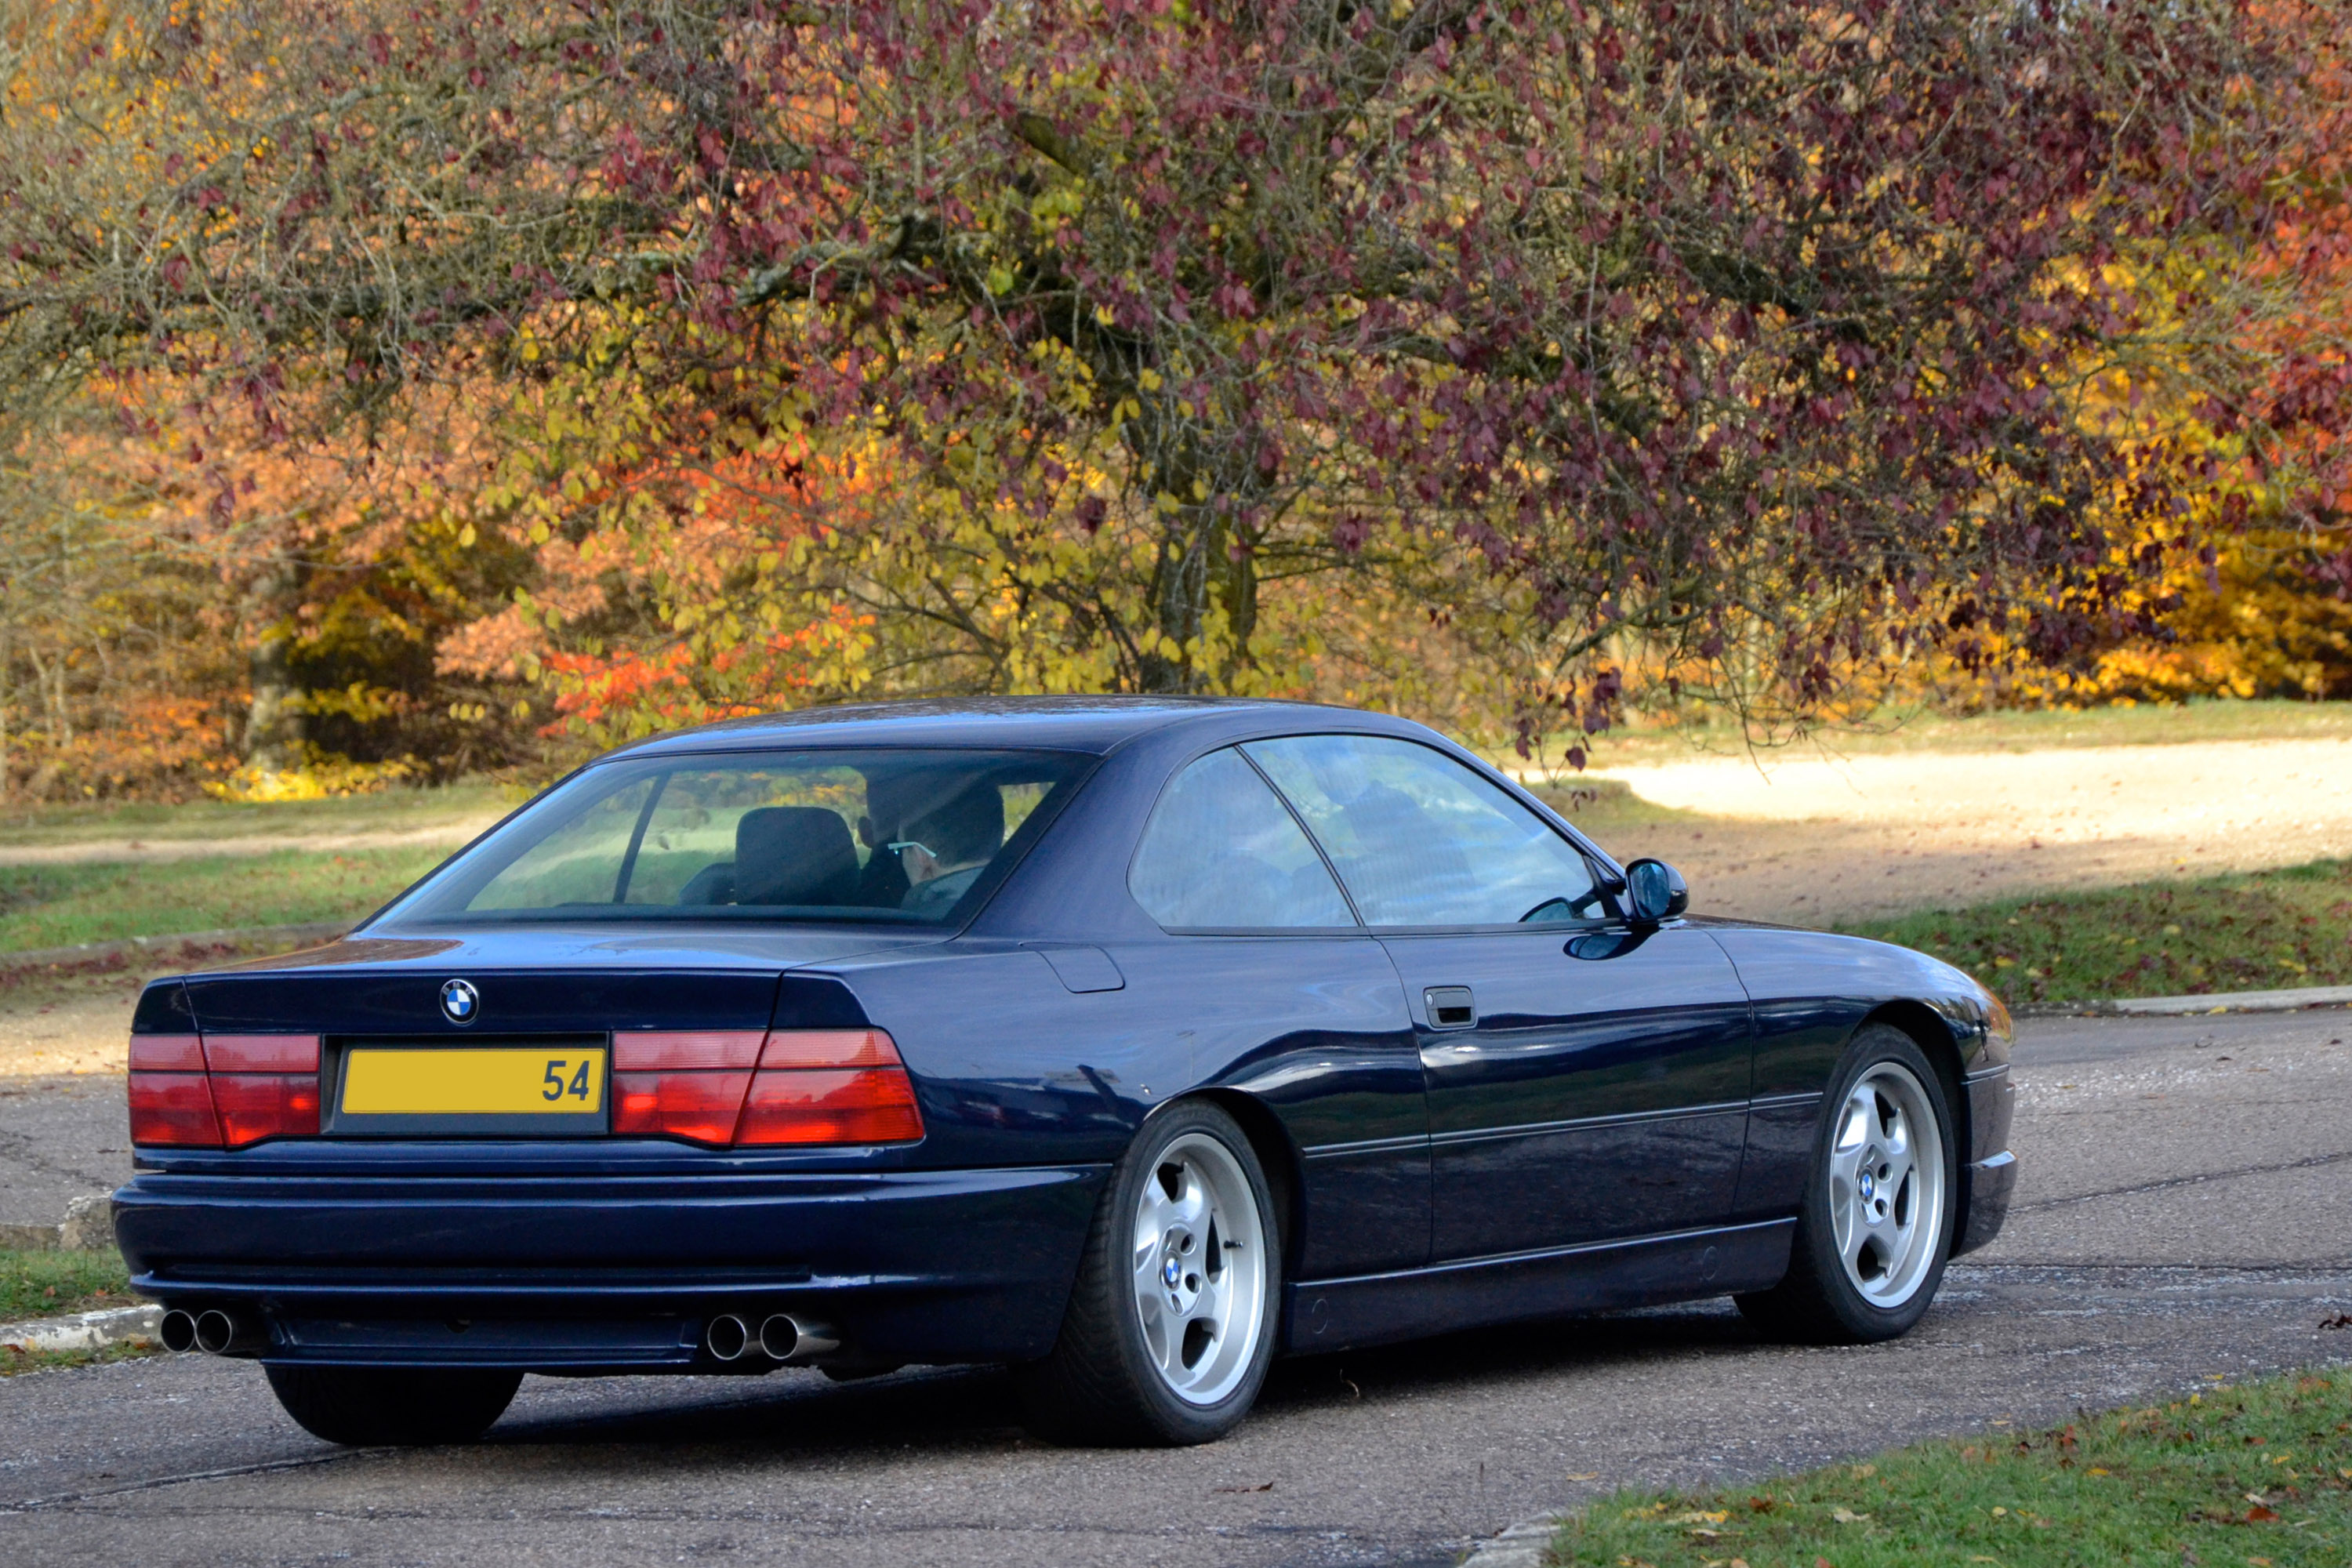 BMW 8-Series E31 - The Great Eight